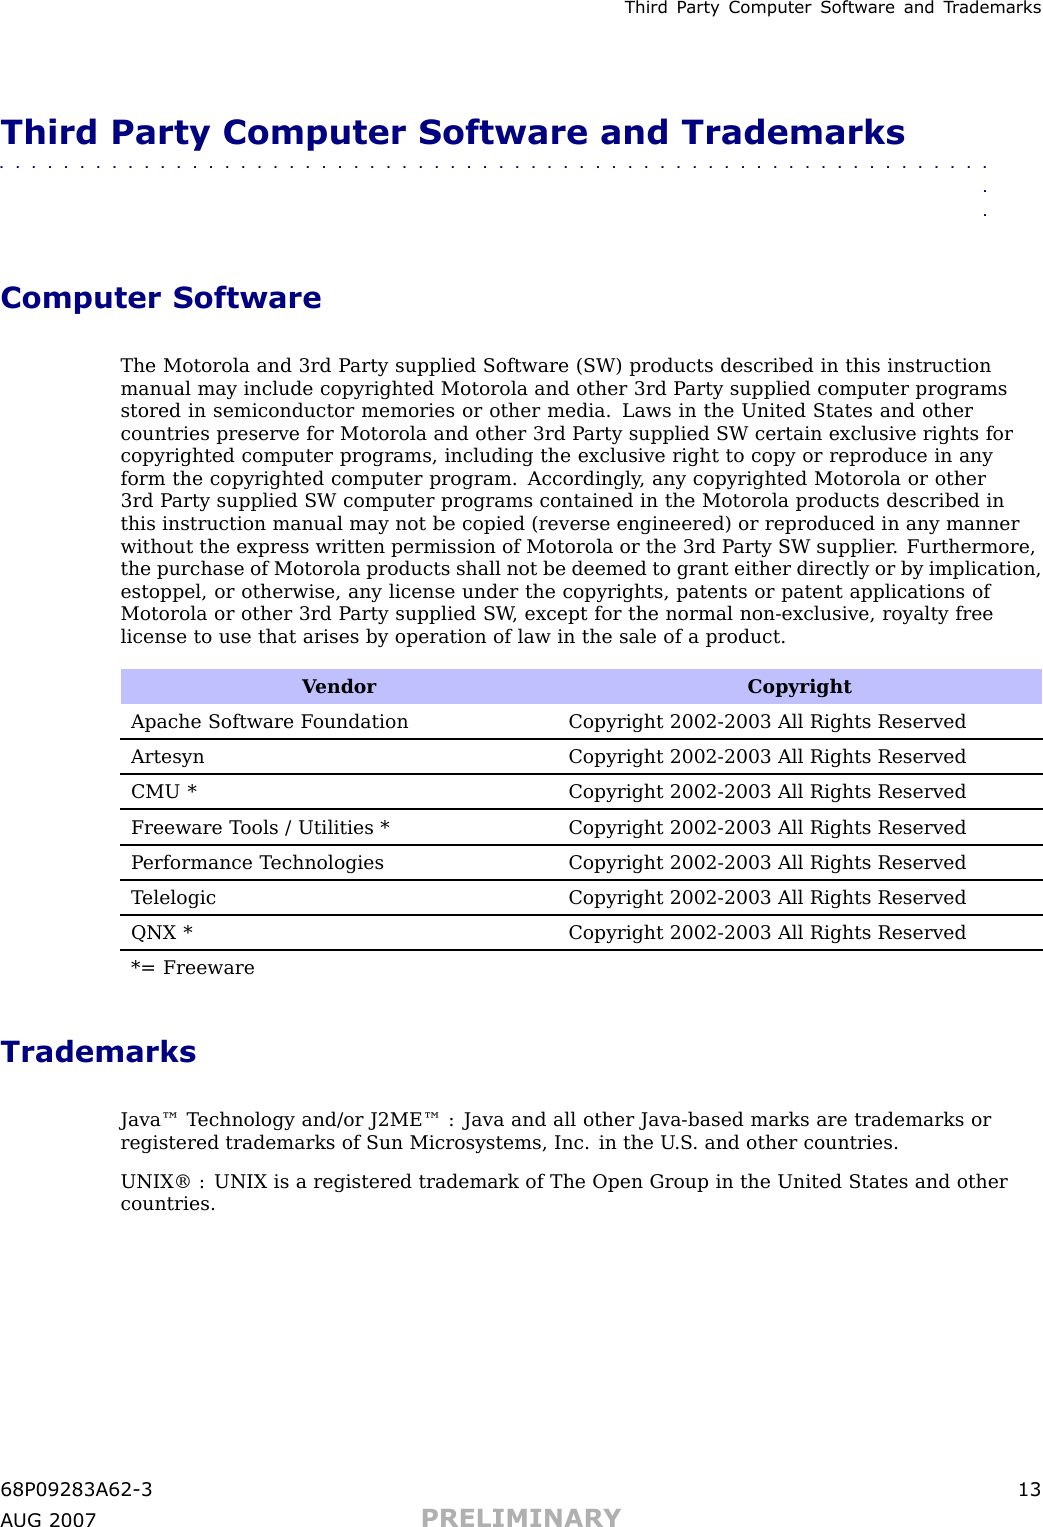 Third P art y Computer Softw are and T r ademarksThird Party Computer Software and Trademarks■■■■■■■■■■■■■■■■■■■■■■■■■■■■■■■■■■■■■■■■■■■■■■■■■■■■■■■■■■■■■■■■Computer SoftwareThe Motorola and 3rd P arty supplied Software (SW) products described in this instructionmanual may include copyrighted Motorola and other 3rd P arty supplied computer programsstored in semiconductor memories or other media. Laws in the United States and othercountries preserve for Motorola and other 3rd P arty supplied SW certain exclusive rights forcopyrighted computer programs, including the exclusive right to copy or reproduce in anyform the copyrighted computer program. Accordingly , any copyrighted Motorola or other3rd P arty supplied SW computer programs contained in the Motorola products described inthis instruction manual may not be copied (reverse engineered) or reproduced in any mannerwithout the express written permission of Motorola or the 3rd P arty SW supplier . Furthermore,the purchase of Motorola products shall not be deemed to grant either directly or by implication,estoppel, or otherwise, any license under the copyrights, patents or patent applications ofMotorola or other 3rd P arty supplied SW , except for the normal non -exclusive, royalty freelicense to use that arises by operation of law in the sale of a product.V endor CopyrightApache Software F oundation Copyright 2002-2003 All Rights ReservedArtesynCopyright 2002-2003 All Rights ReservedCMU *Copyright 2002-2003 All Rights ReservedFreeware T ools / Utilities * Copyright 2002-2003 All Rights ReservedP erformance T echnologies Copyright 2002-2003 All Rights ReservedT elelogic Copyright 2002-2003 All Rights ReservedQNX *Copyright 2002-2003 All Rights Reserved*= FreewareTrademarksJava™ T echnology and/or J2ME™ : Java and all other Java -based marks are trademarks orregistered trademarks of Sun Microsystems, Inc. in the U .S . and other countries.UNIX® : UNIX is a registered trademark of The Open Group in the United States and othercountries.68P09283A62 -3 13A UG 2007 PRELIMINARY